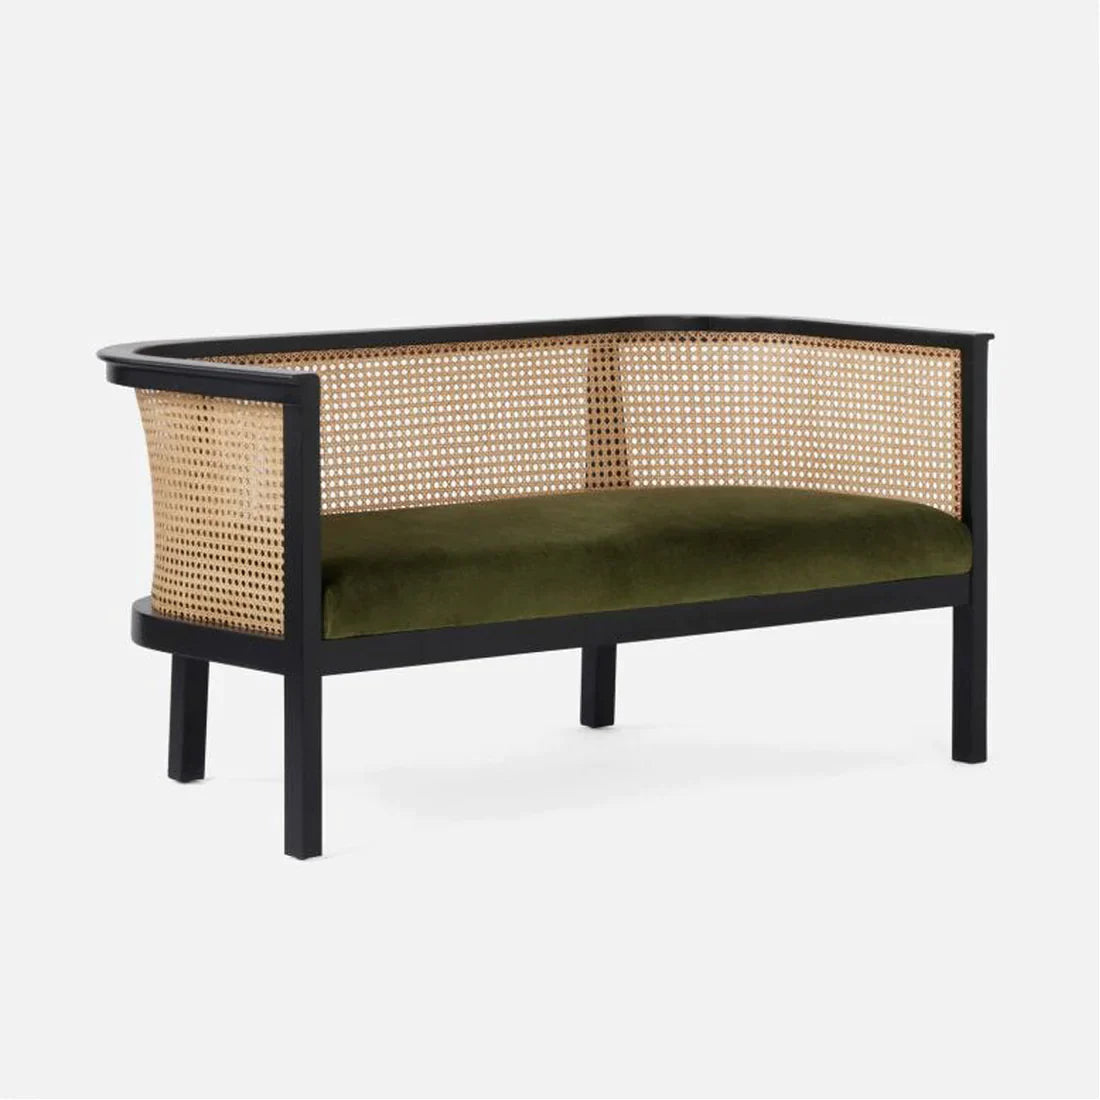 Entryway Rattan Sofa with Upholstered Seat - INTERIORTONIC